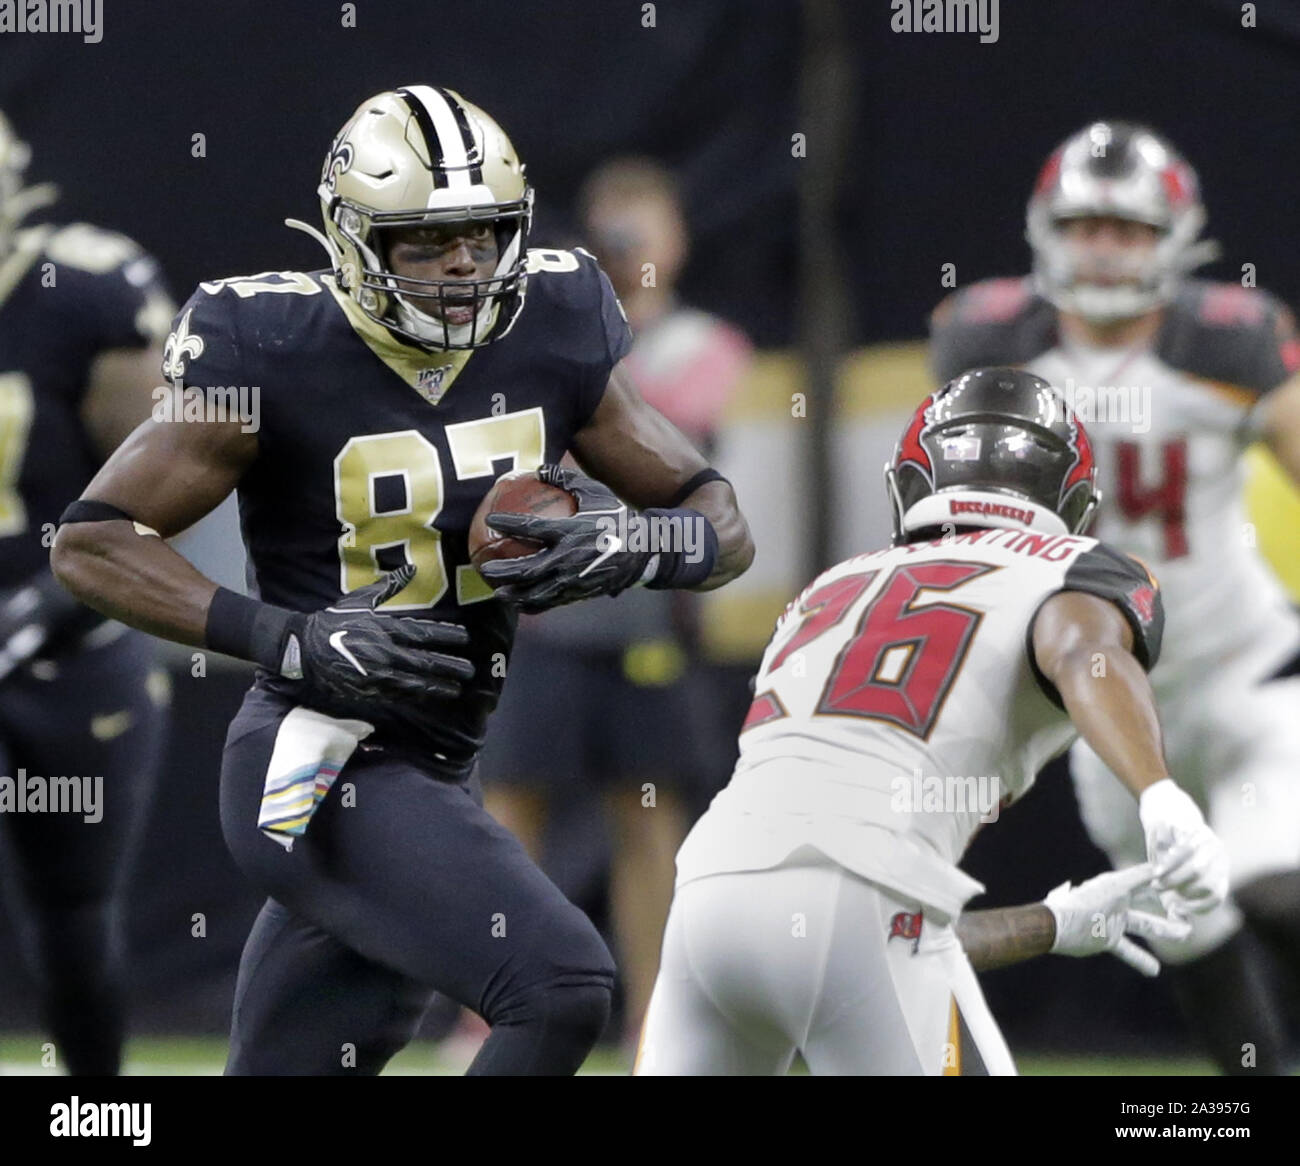 New Orleans, United States. 06th Oct, 2019. New Orleans Saints tight end Jared Cook (87) takes a Teddy Bridgewater pass up the field against Tampa Bay Buccaneers defensive back Sean Murphy-Bunting (26) at the Louisiana Superdome in New Orleans on Sunday, October 6, 2019. Photo by AJ Sisco/UPI Credit: UPI/Alamy Live News Stock Photo